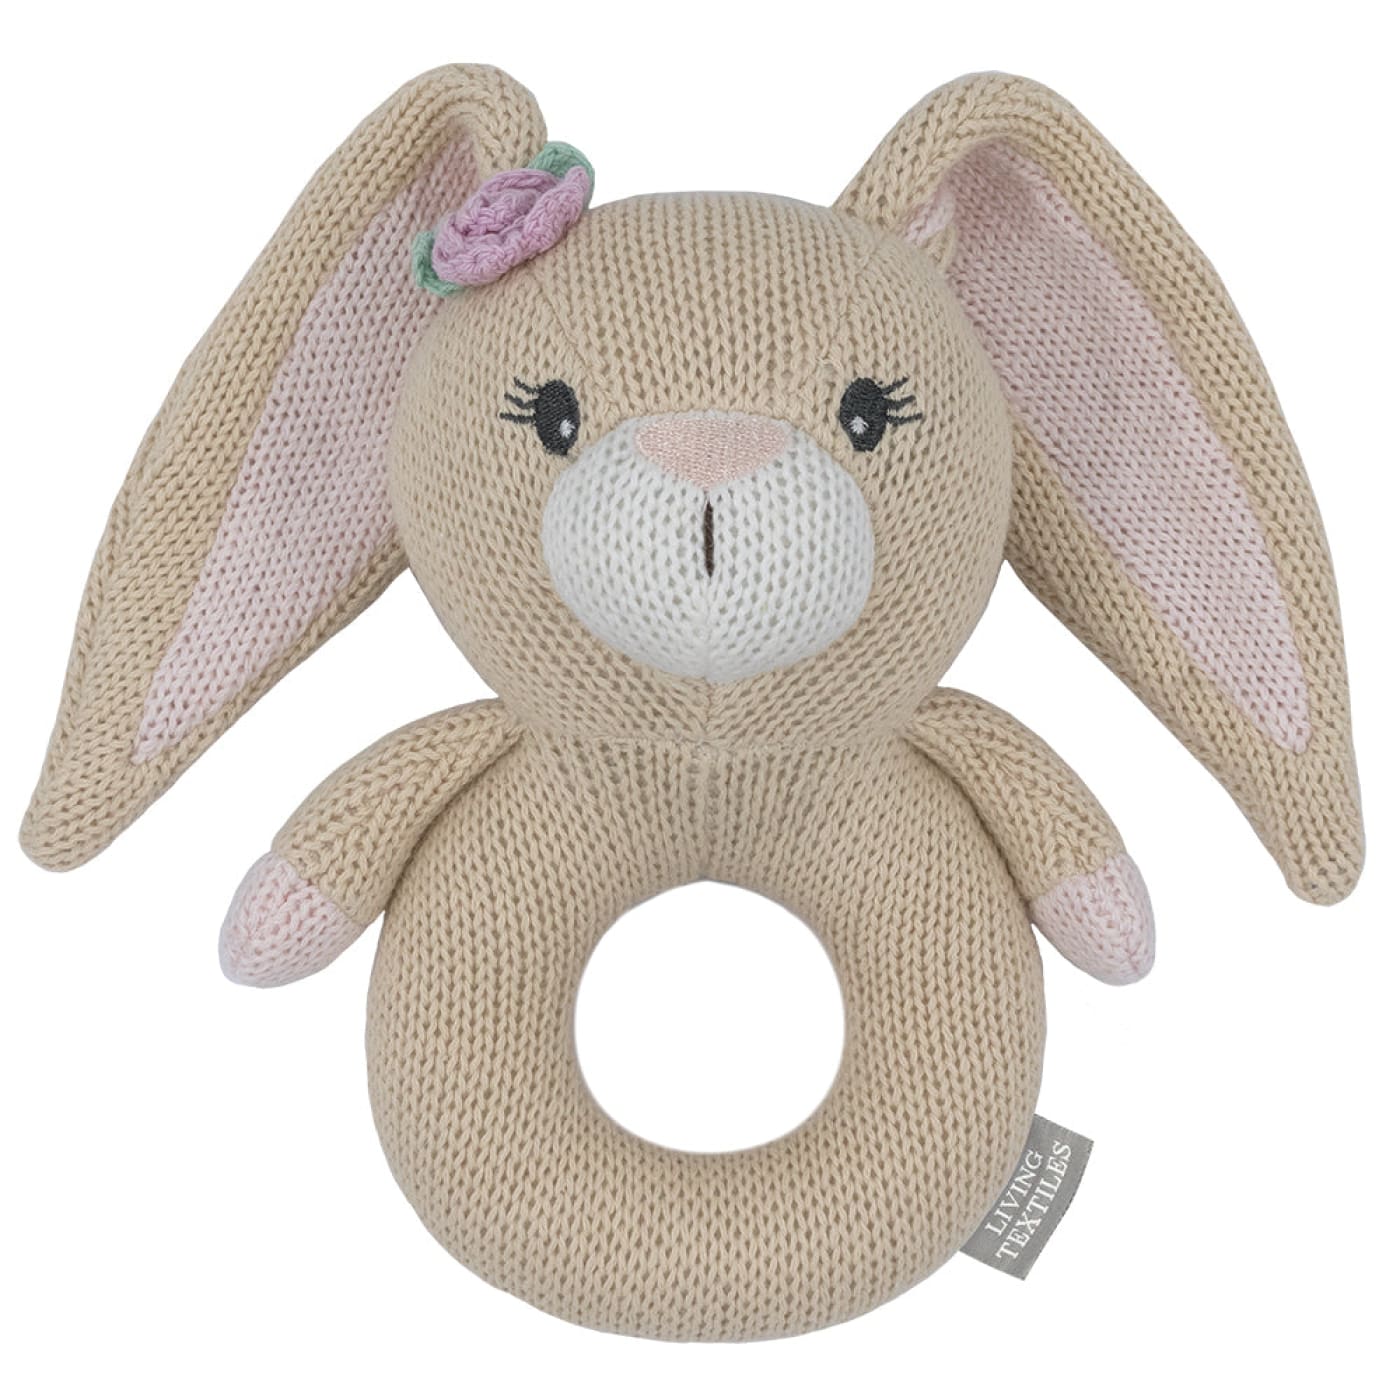 Living Textiles Whimsical Knitted Ring Rattle - Amelia Bunny - Amelia Bunny - TOYS & PLAY - BLANKIES/COMFORTERS/RATTLES